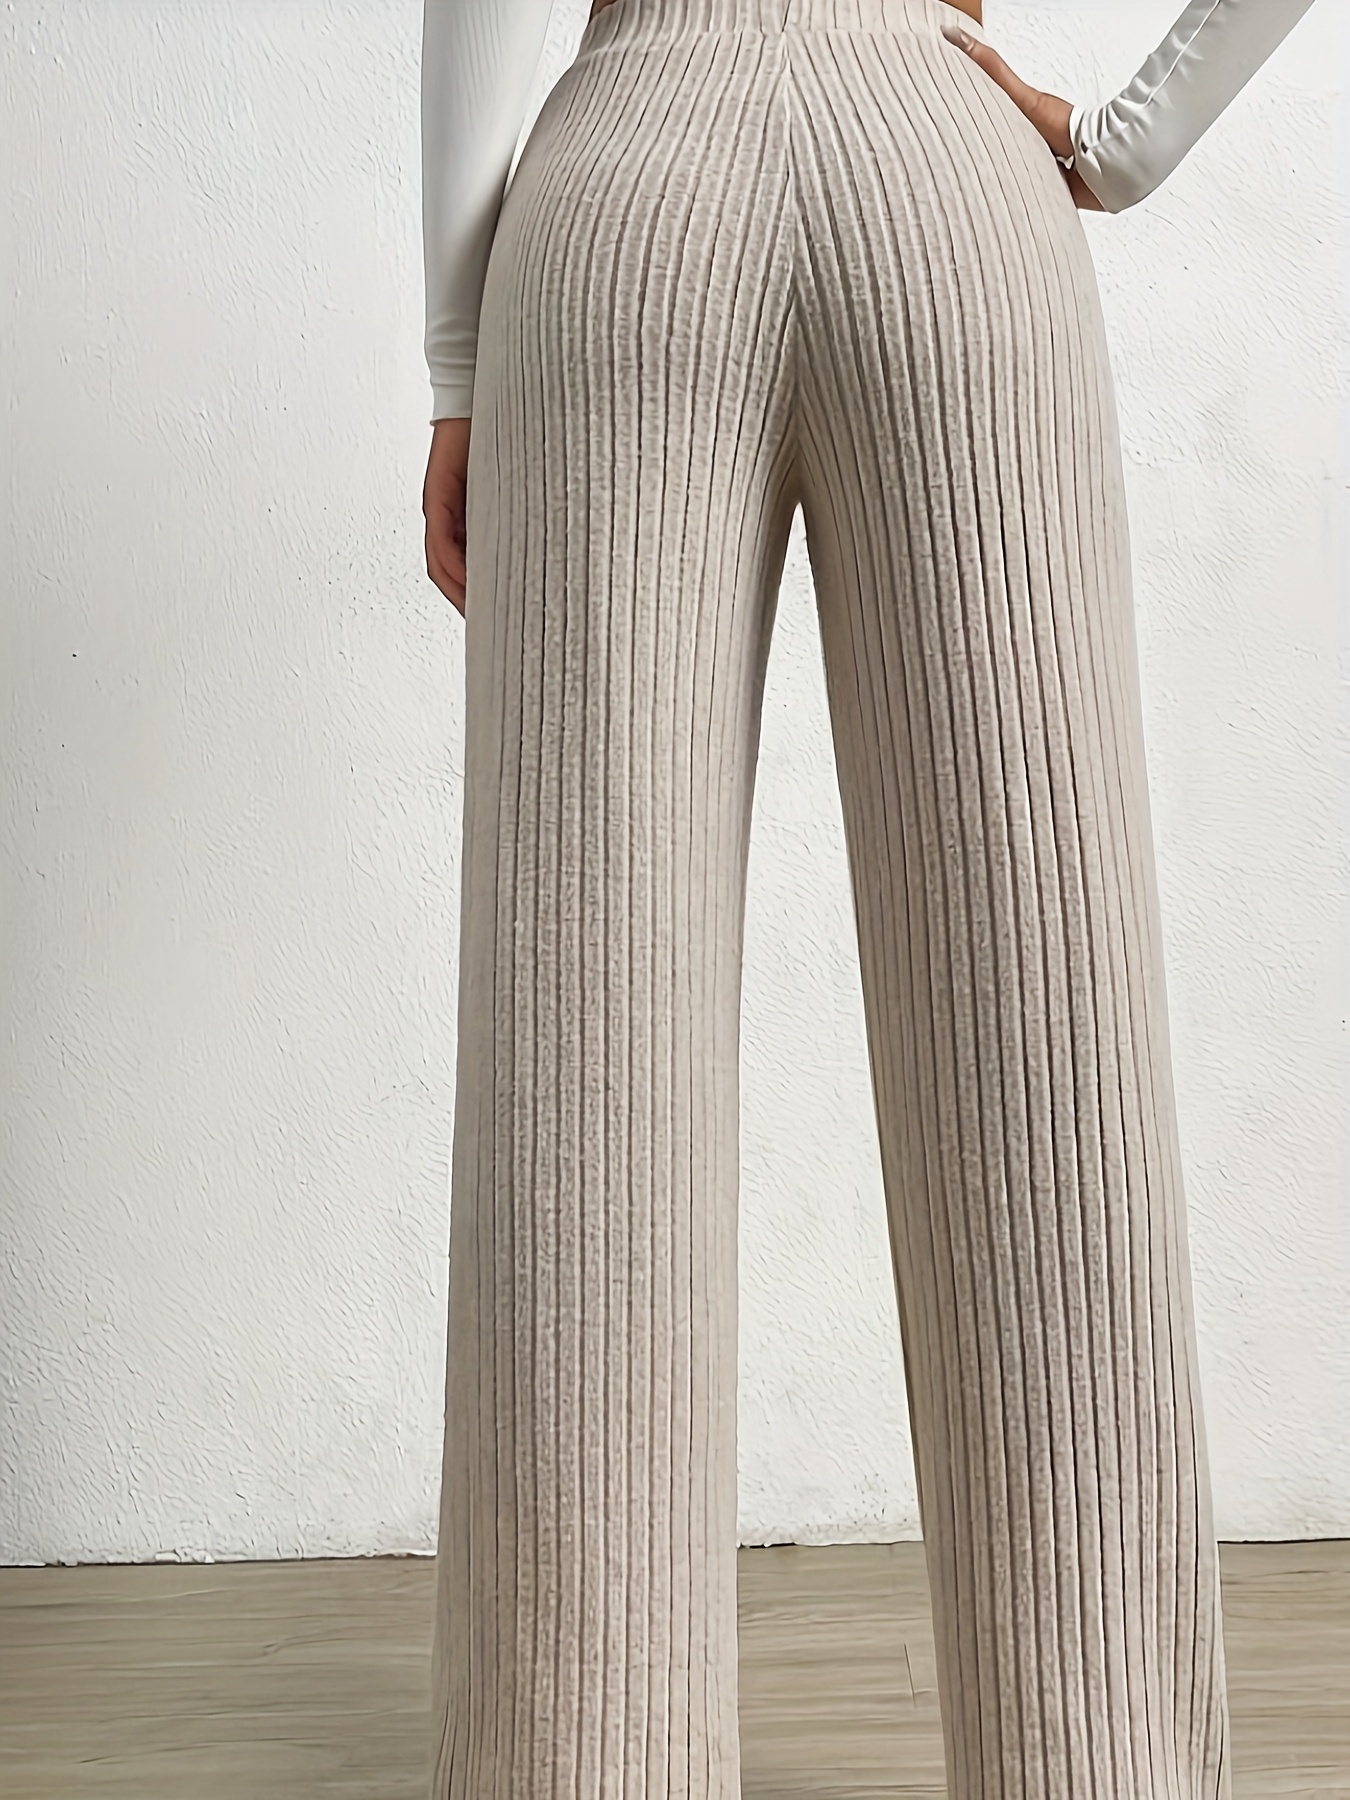 Wide Knitted Pants Beige  Pants, Knit pants, Knitted